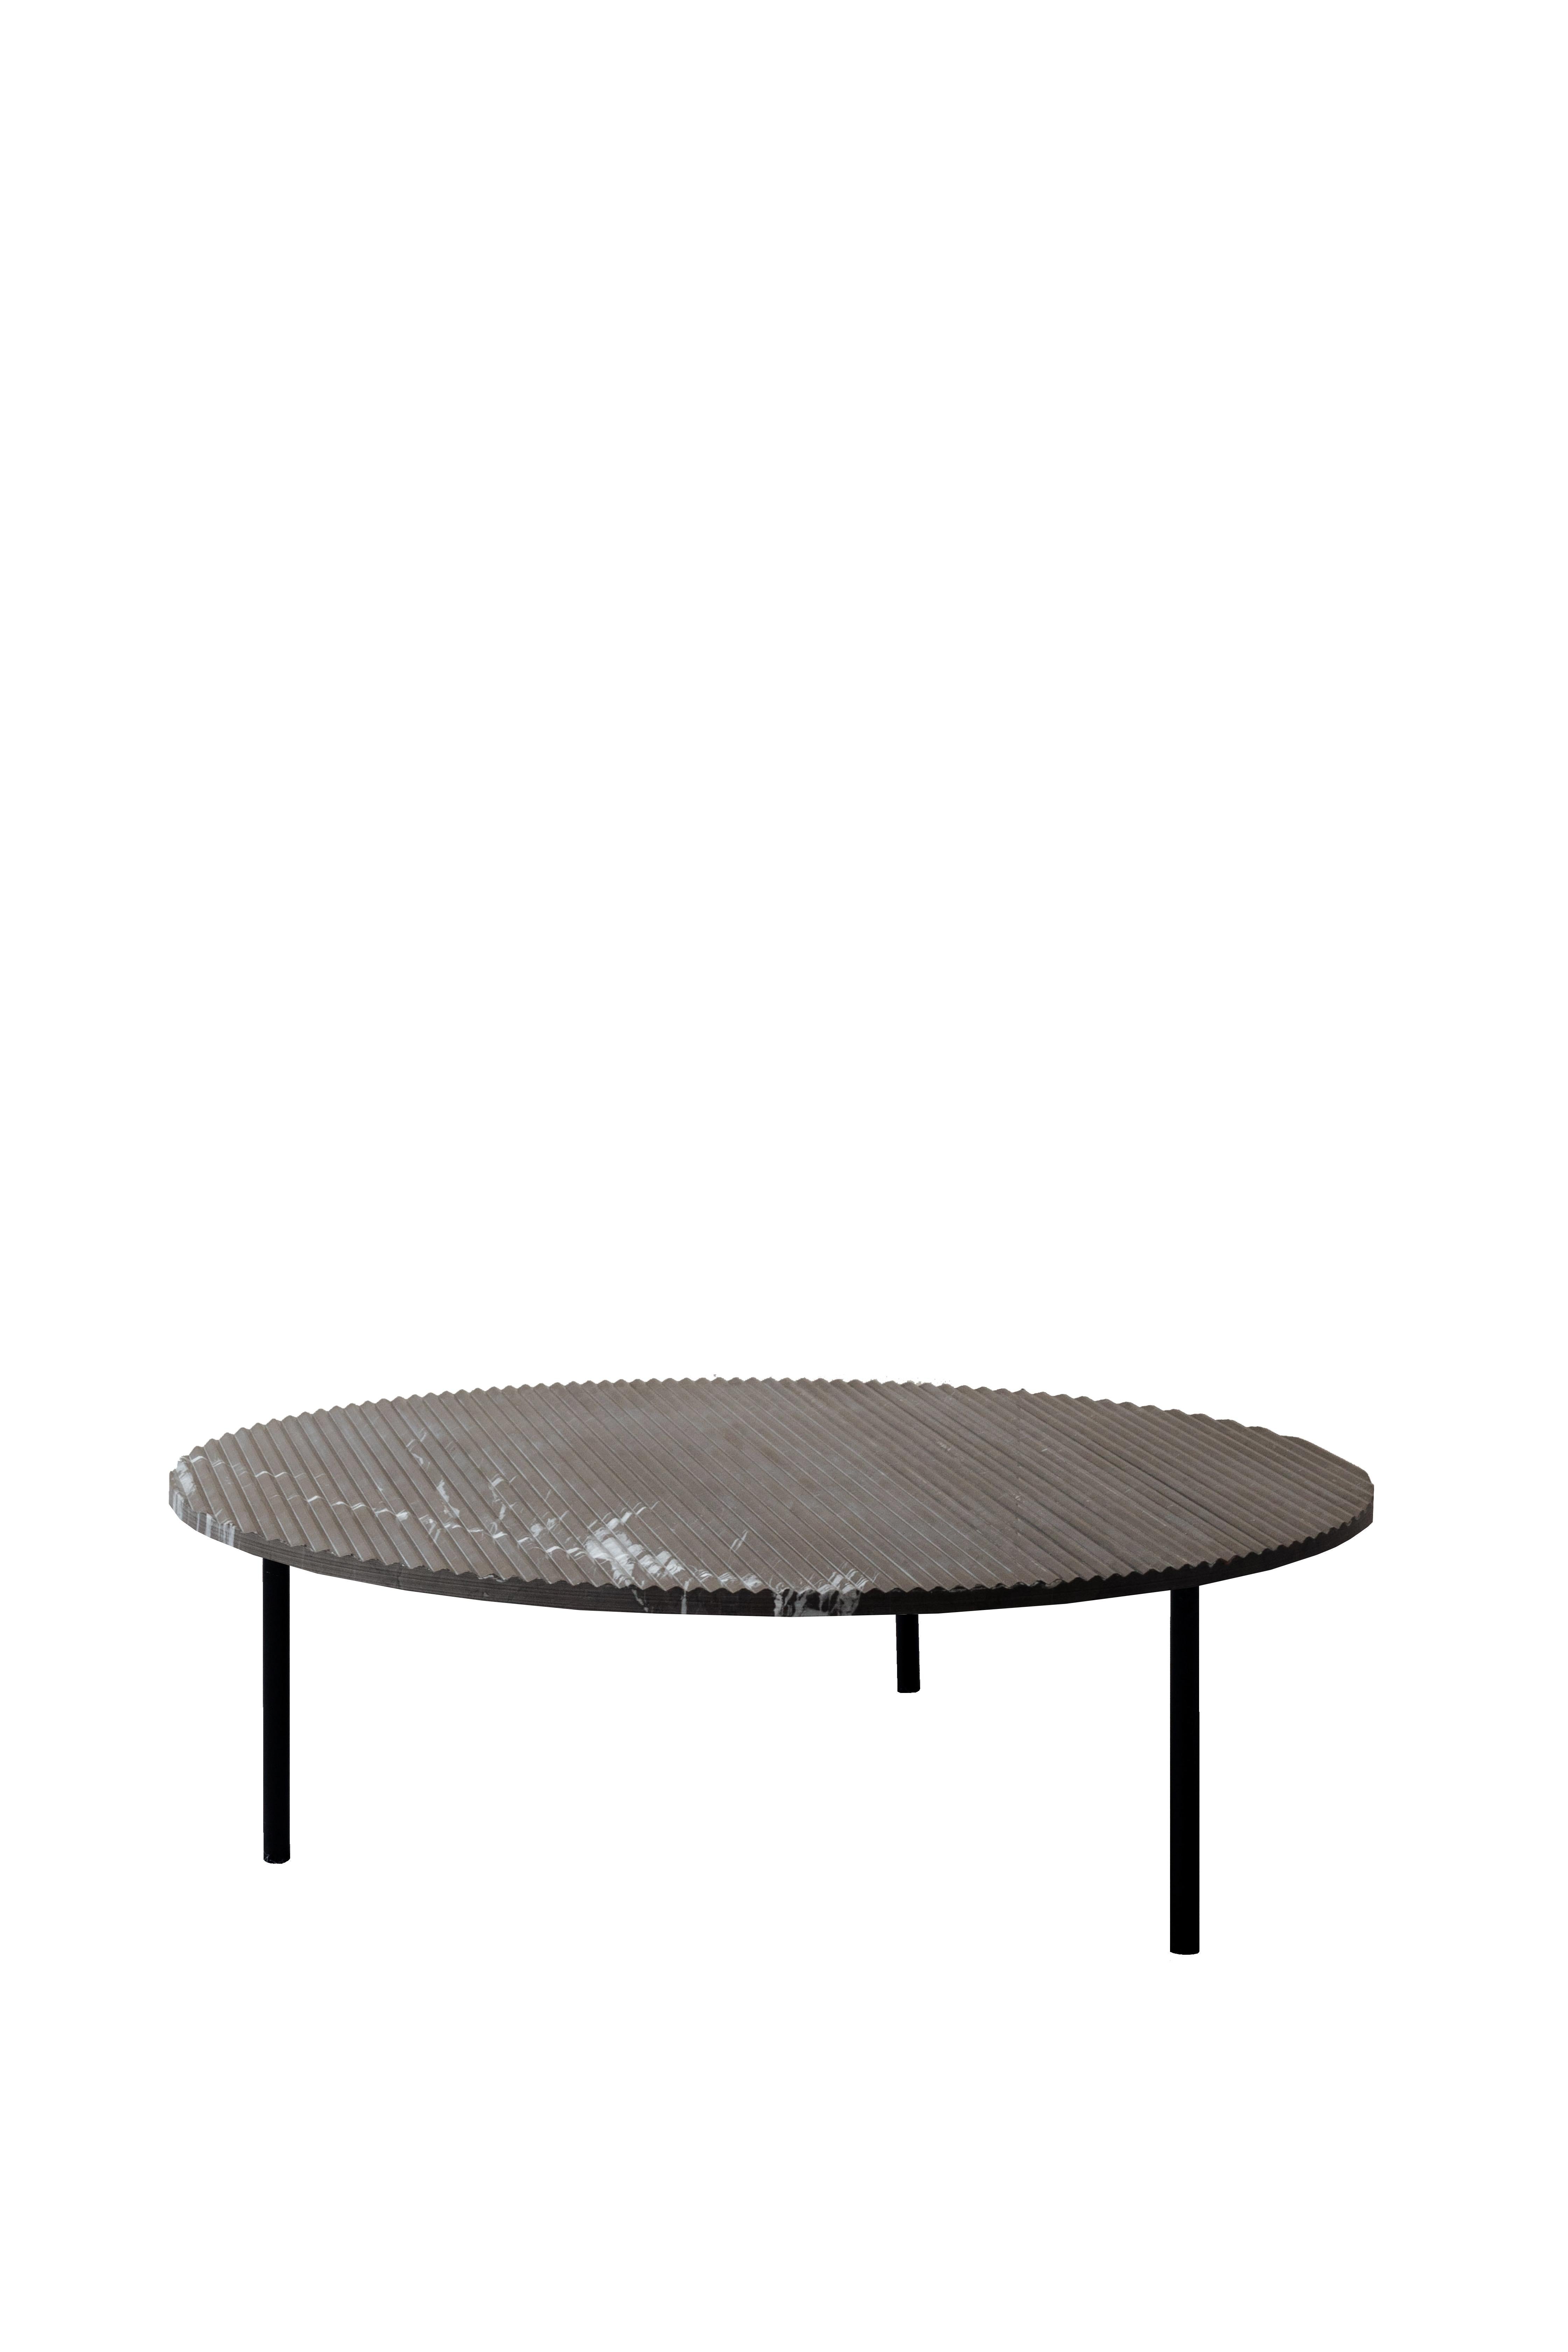 Gruff Grooved Coffe Table Large In New Condition For Sale In ŁÓDŹ, PL